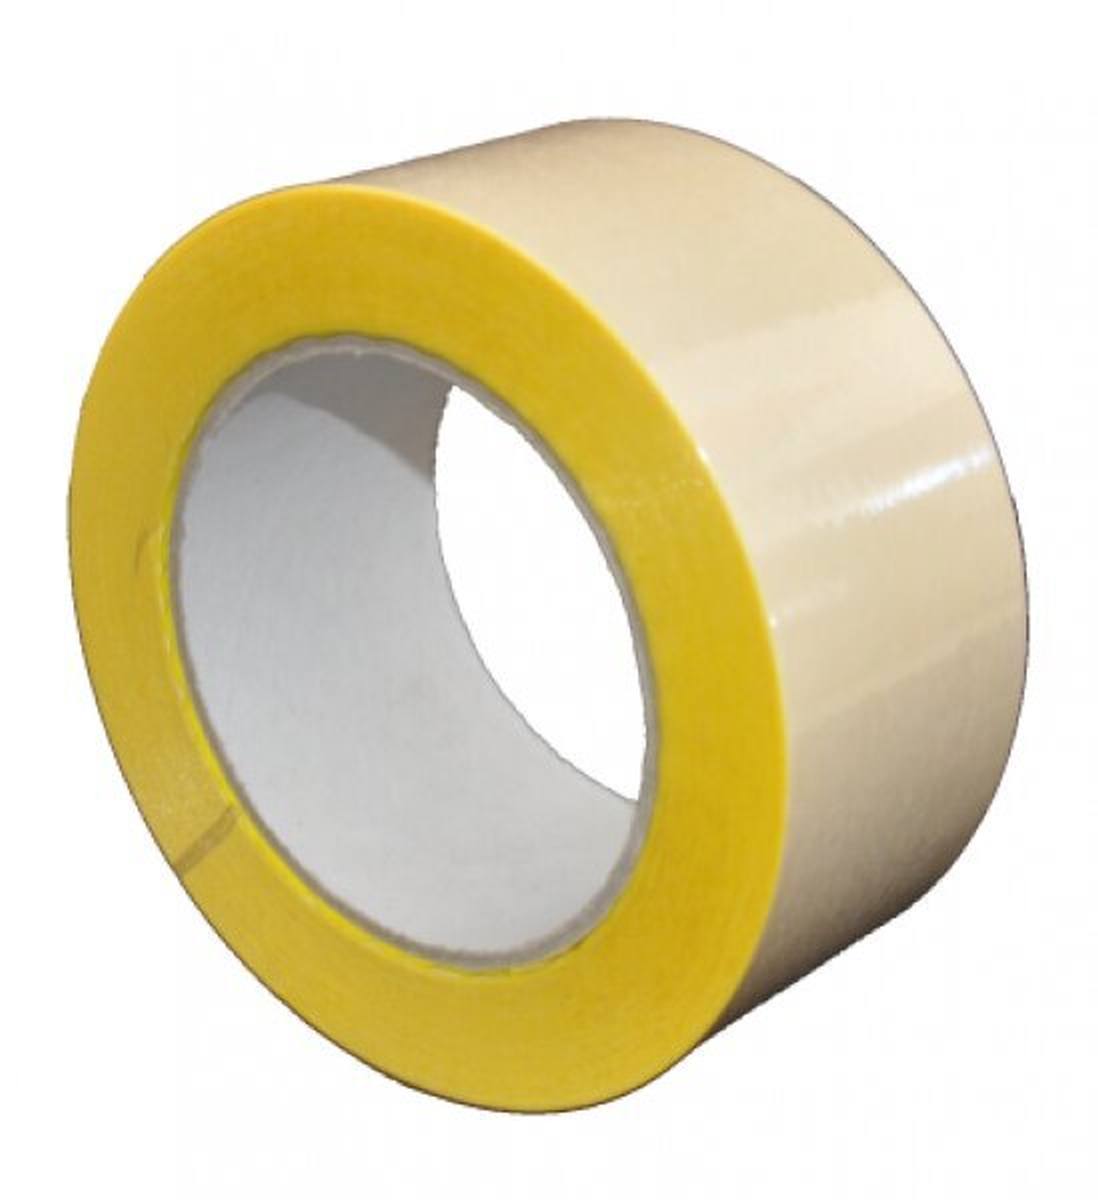 S-K-S 407 Double-sided adhesive tape with polypropylene backing, high / low tack, yellow, 200 mm x 50 m, 0.15 mm